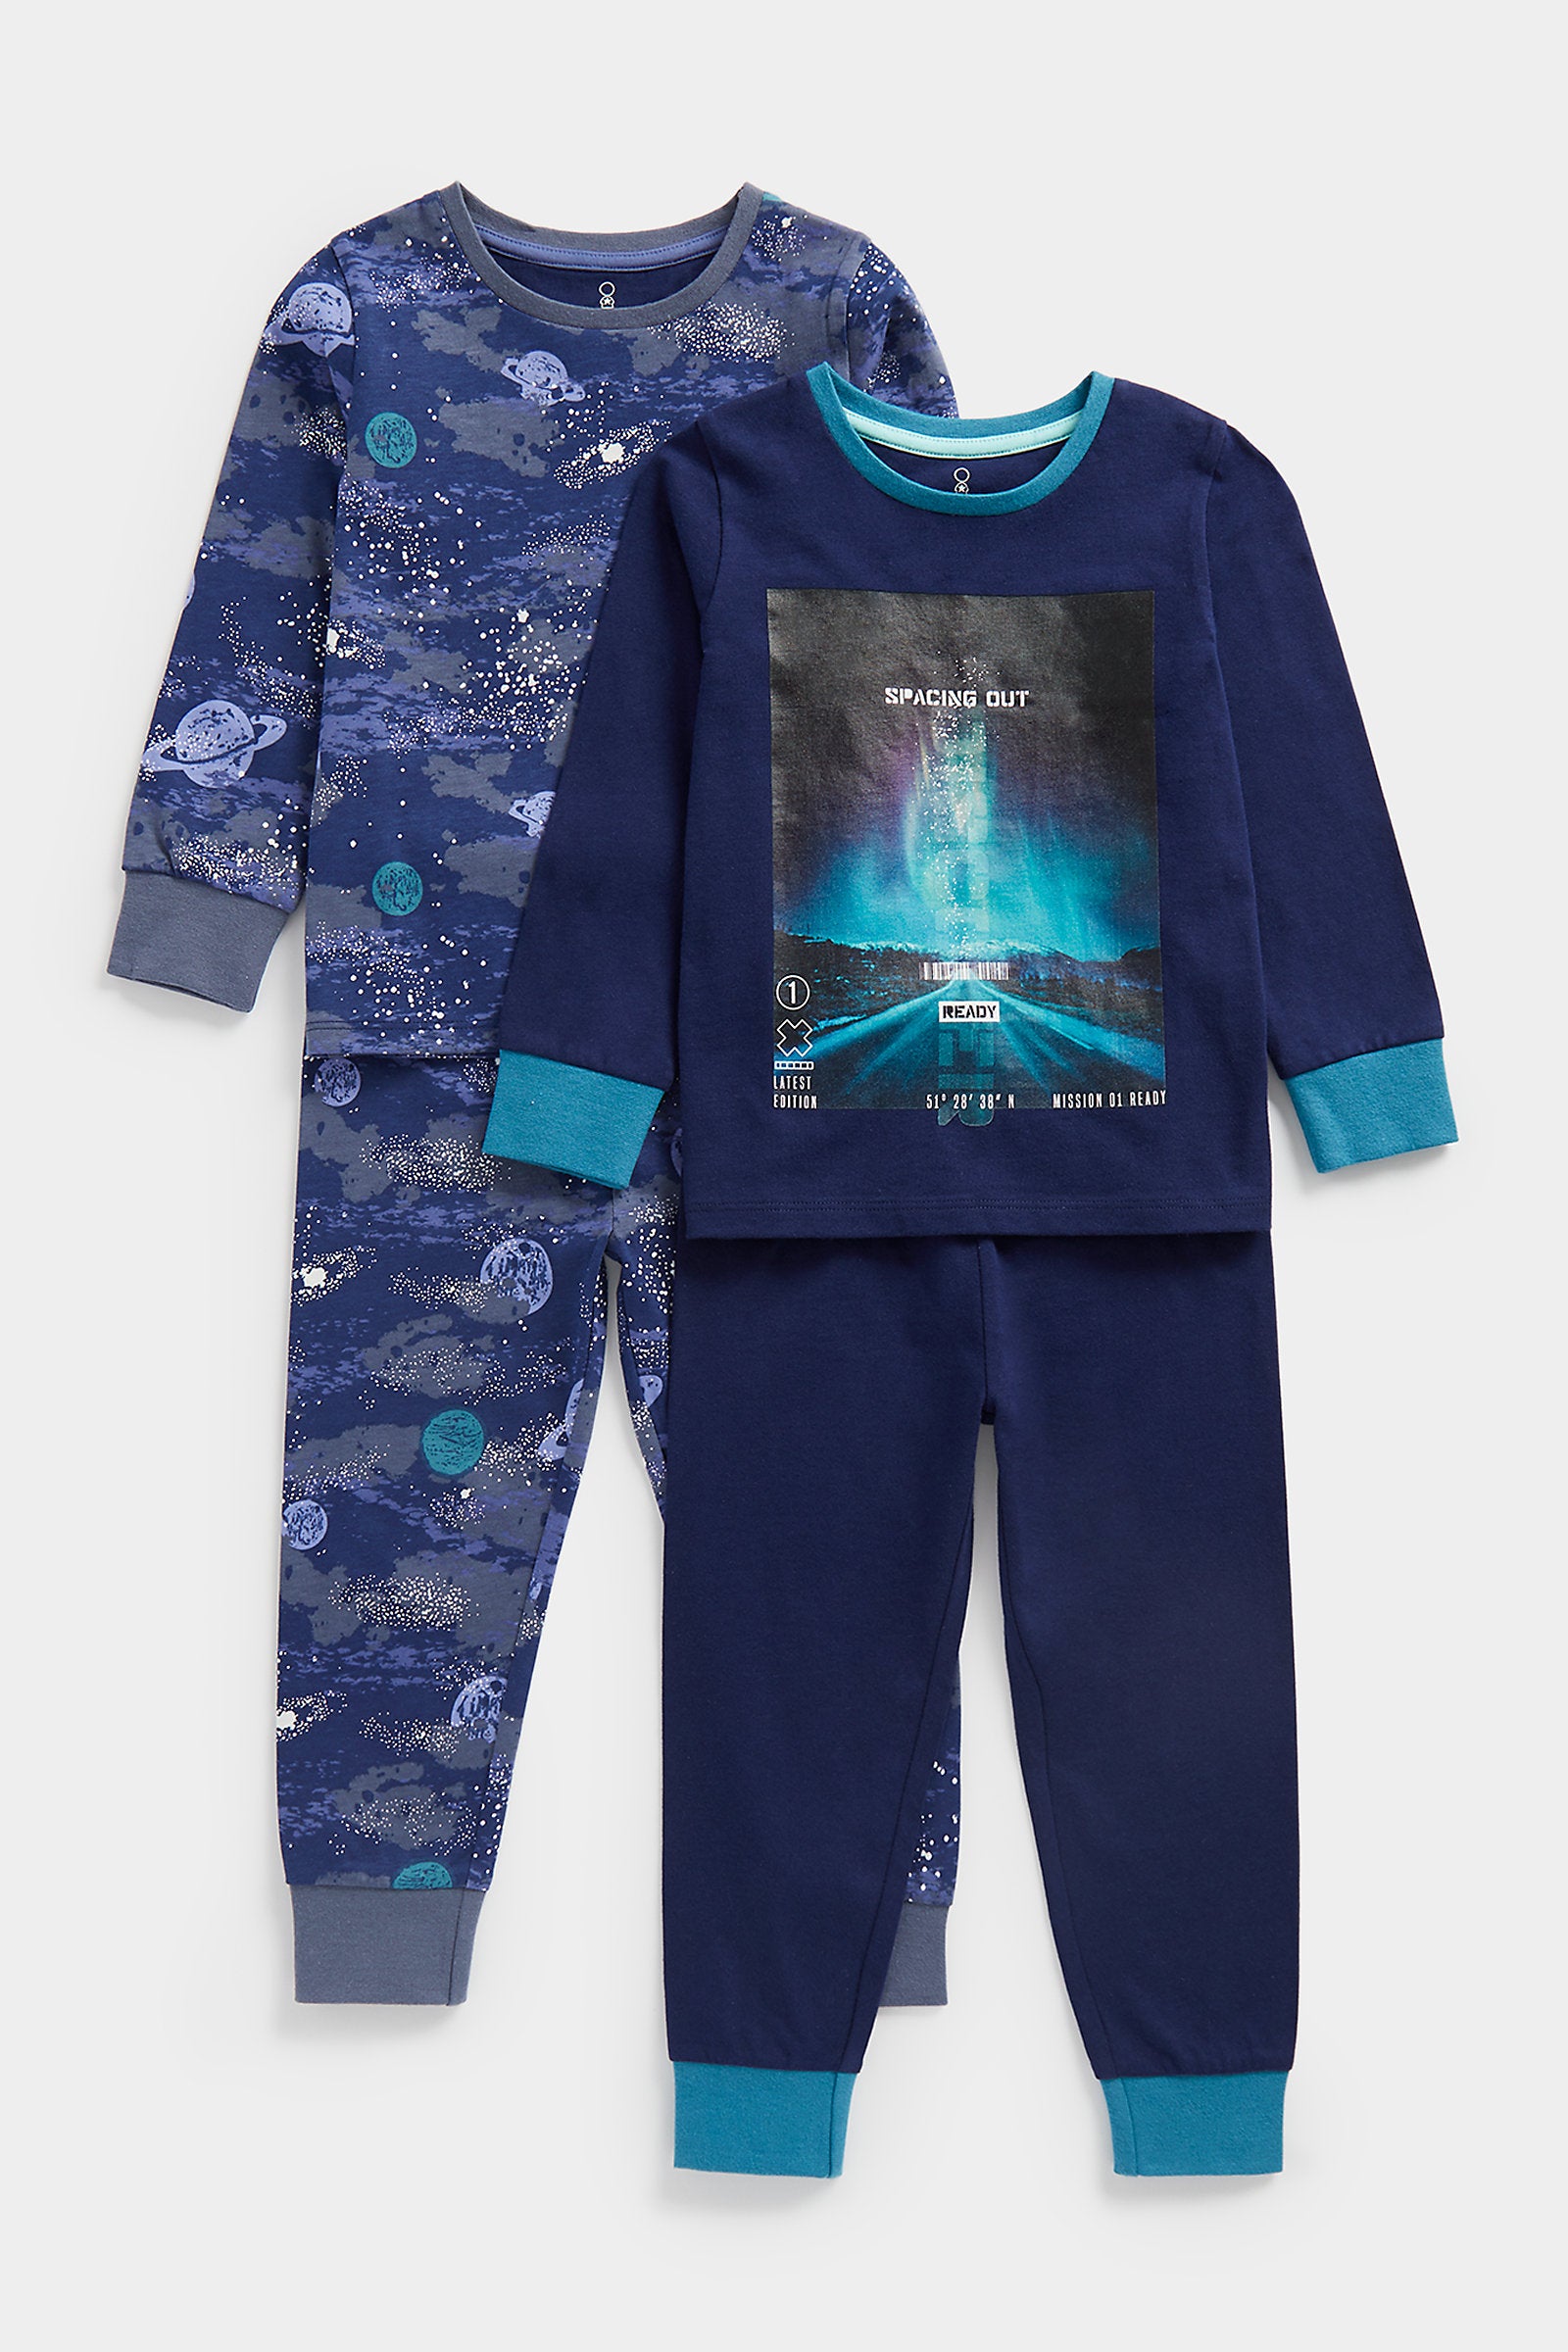 Mothercare Spacing Out Pyjamas - 2 Pack